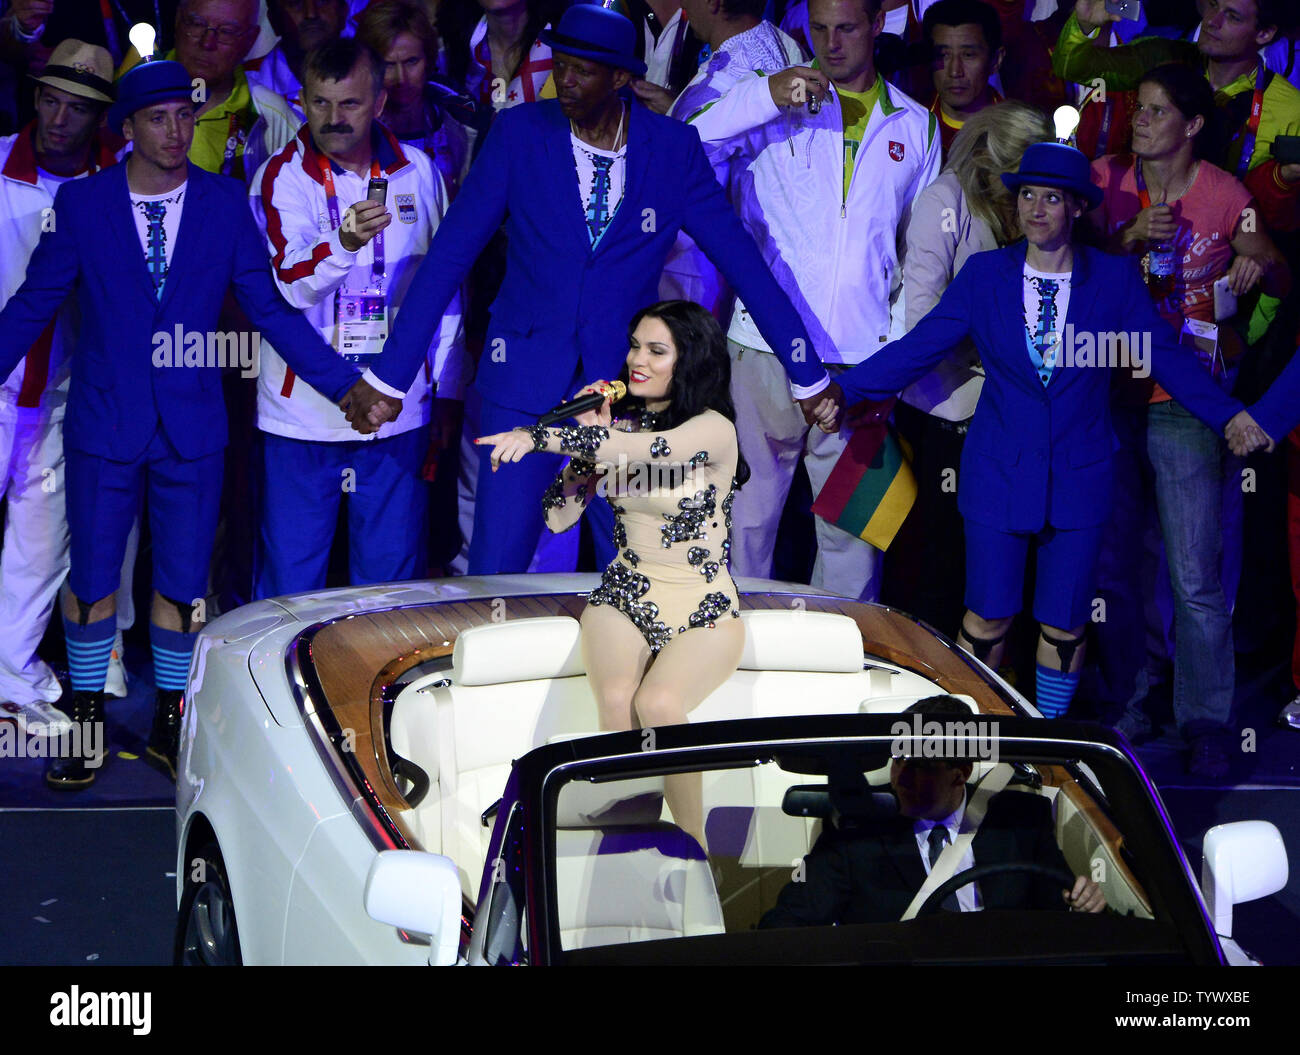 Jesse J performs from the back of a limousine during the Closing ceremony of the London 2012 Summer Olympics on August 12, 2012 in London.   UPI/Ron Sachs Stock Photo